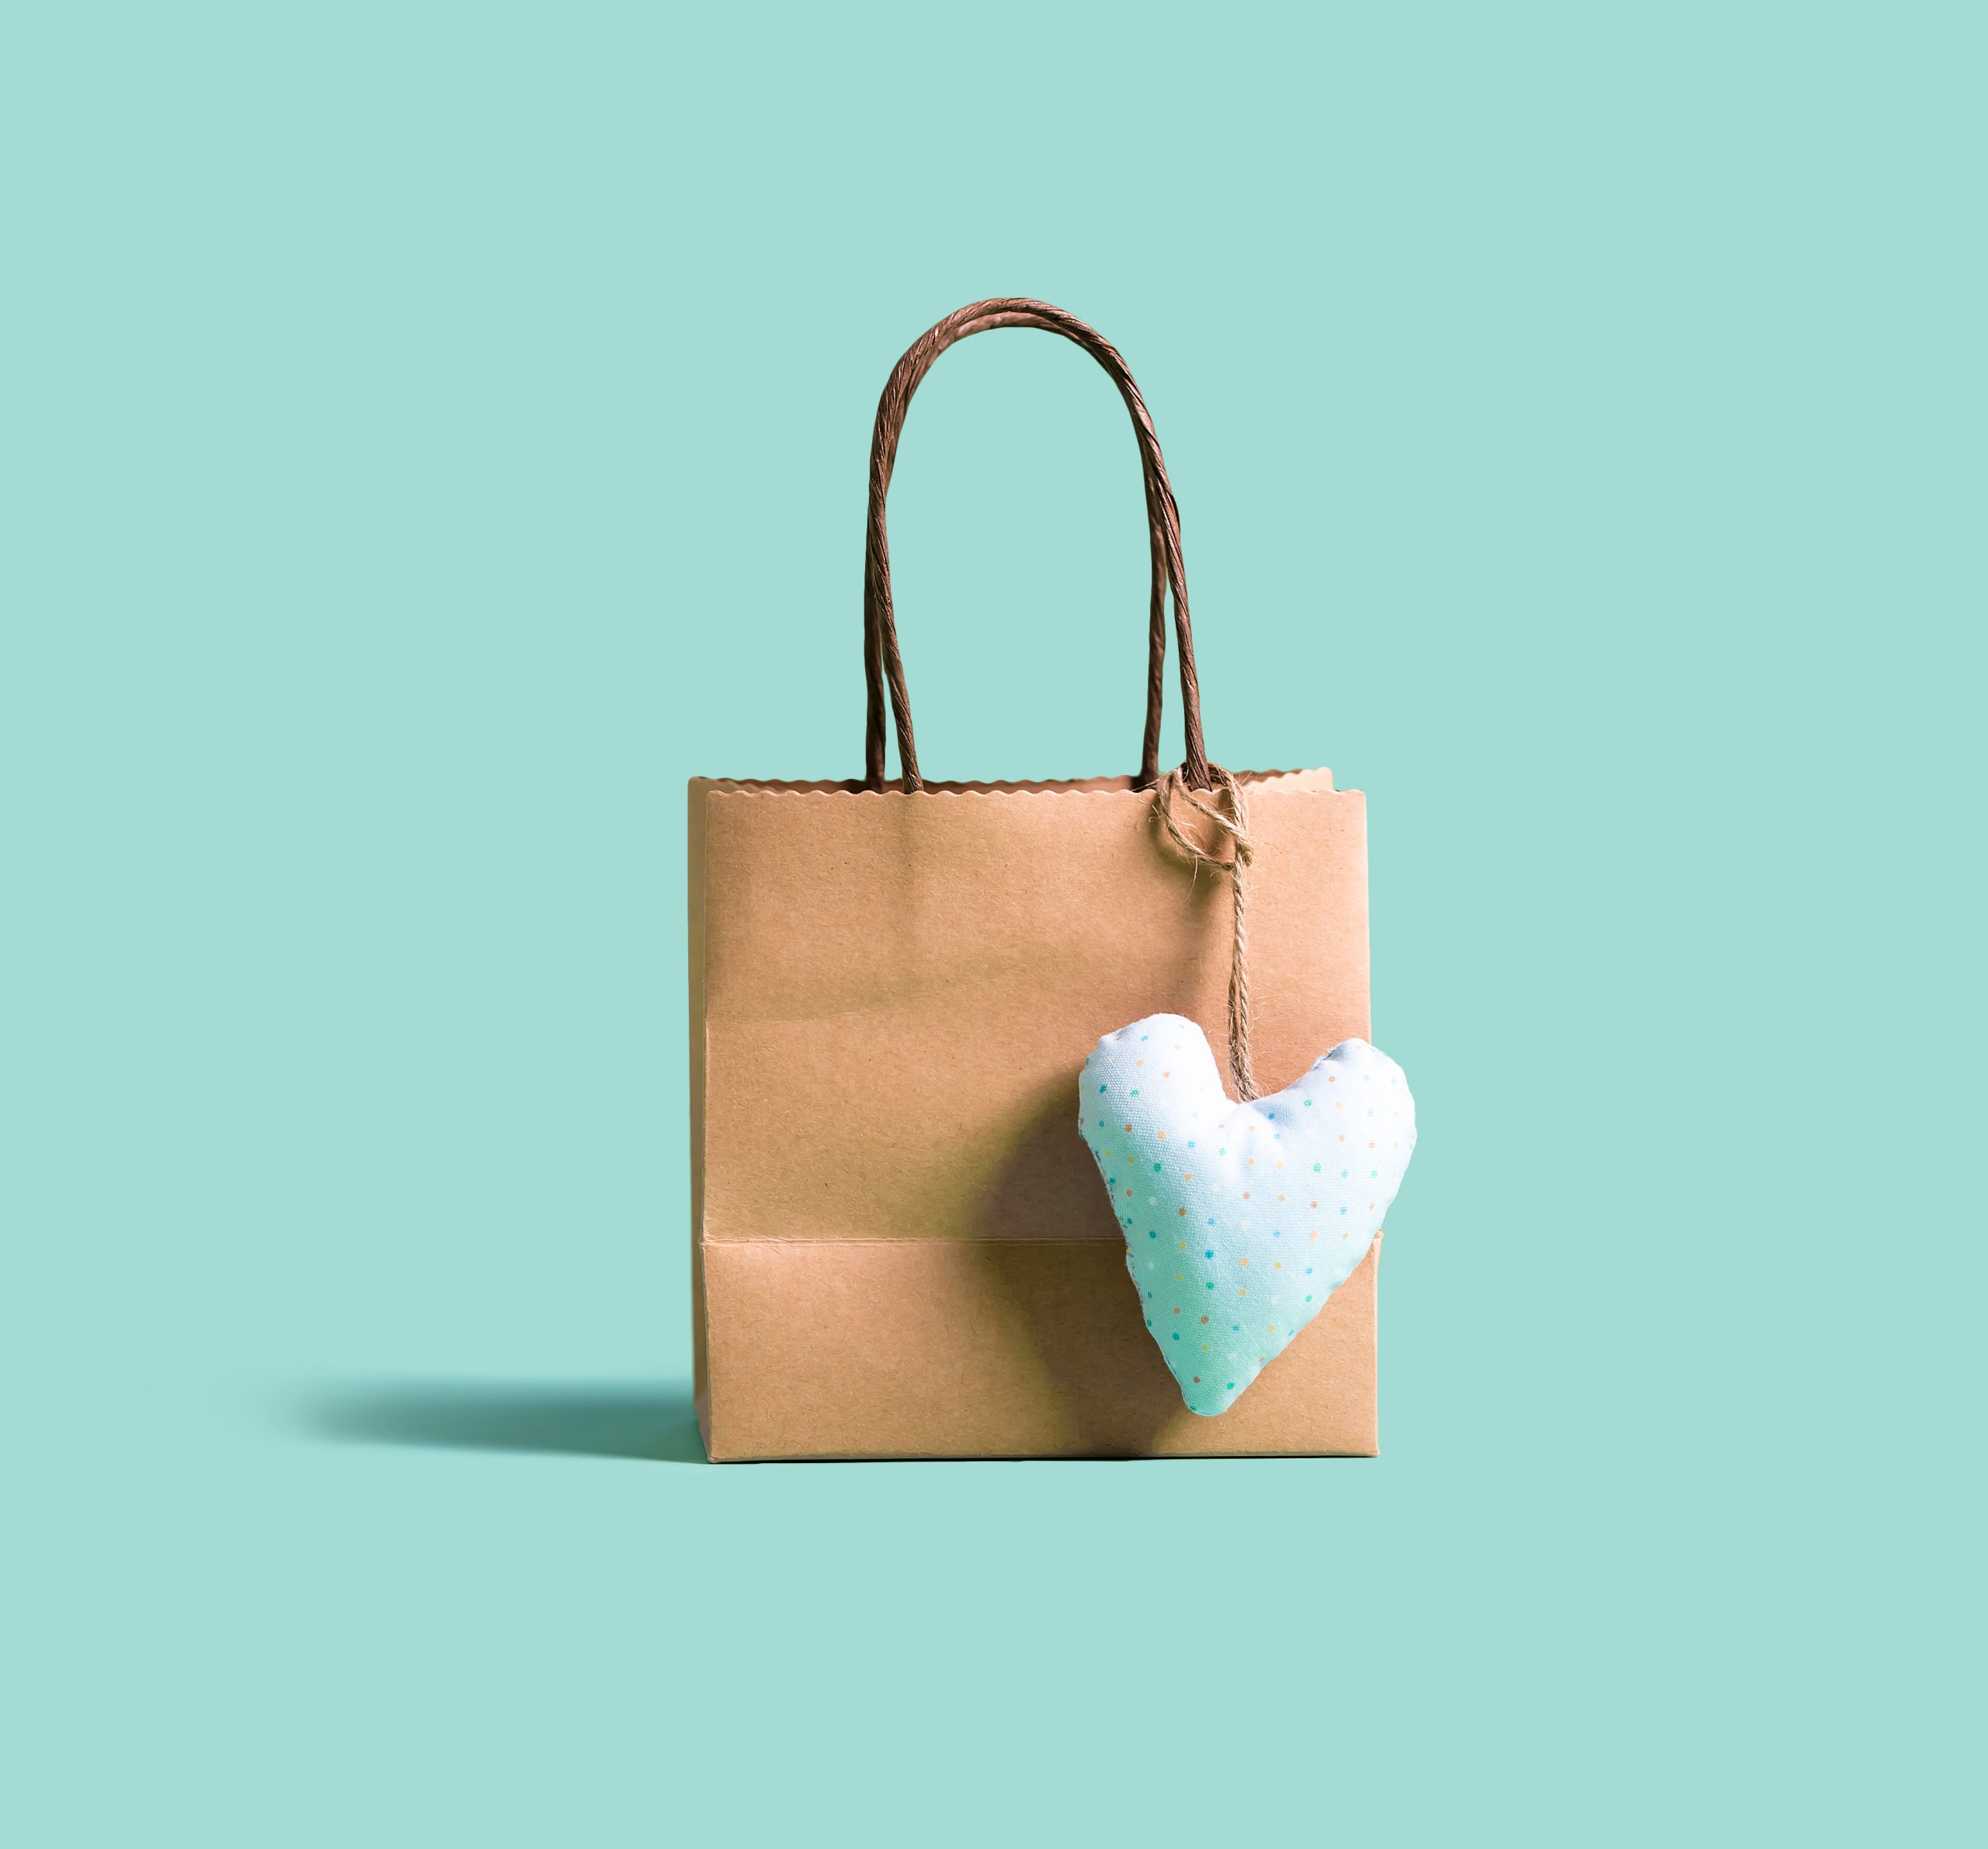 A brown kraft paper shopping bag with small blue felt heart cushion against a matching blue background